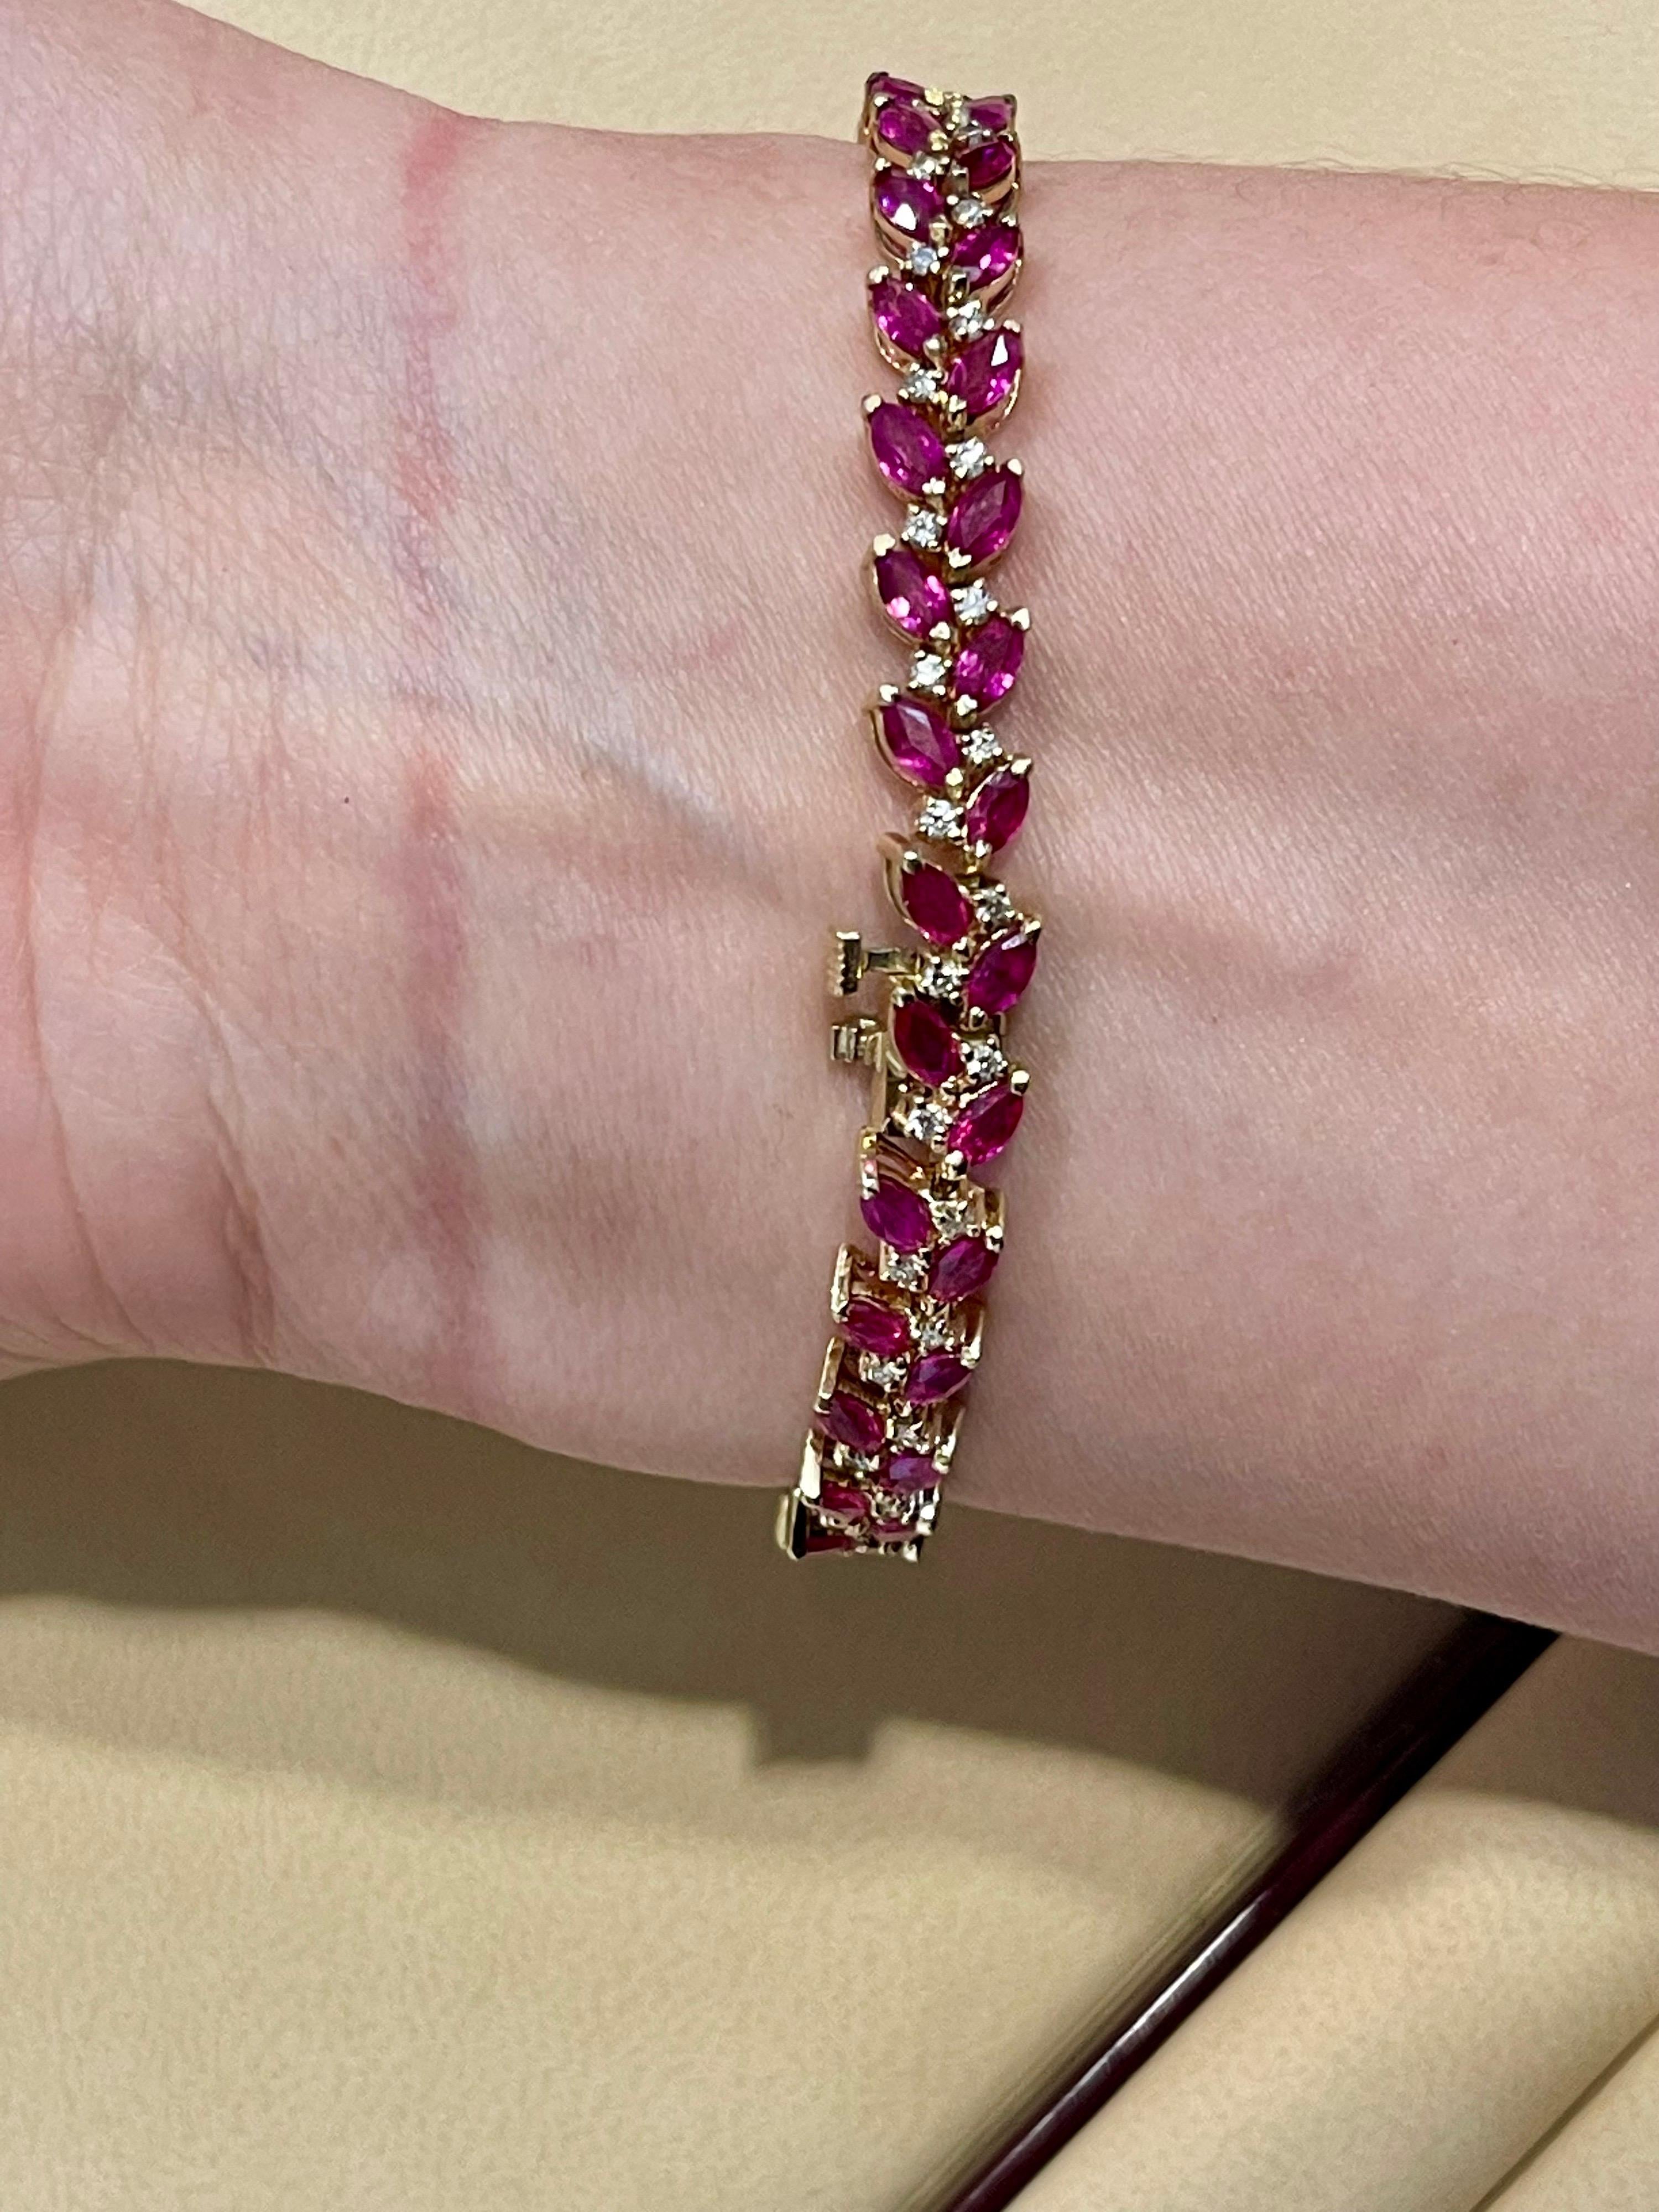 12 Carat Natural Marquise Ruby and Diamond Tennis Bracelet 14 Karat Yellow Gold For Sale 1